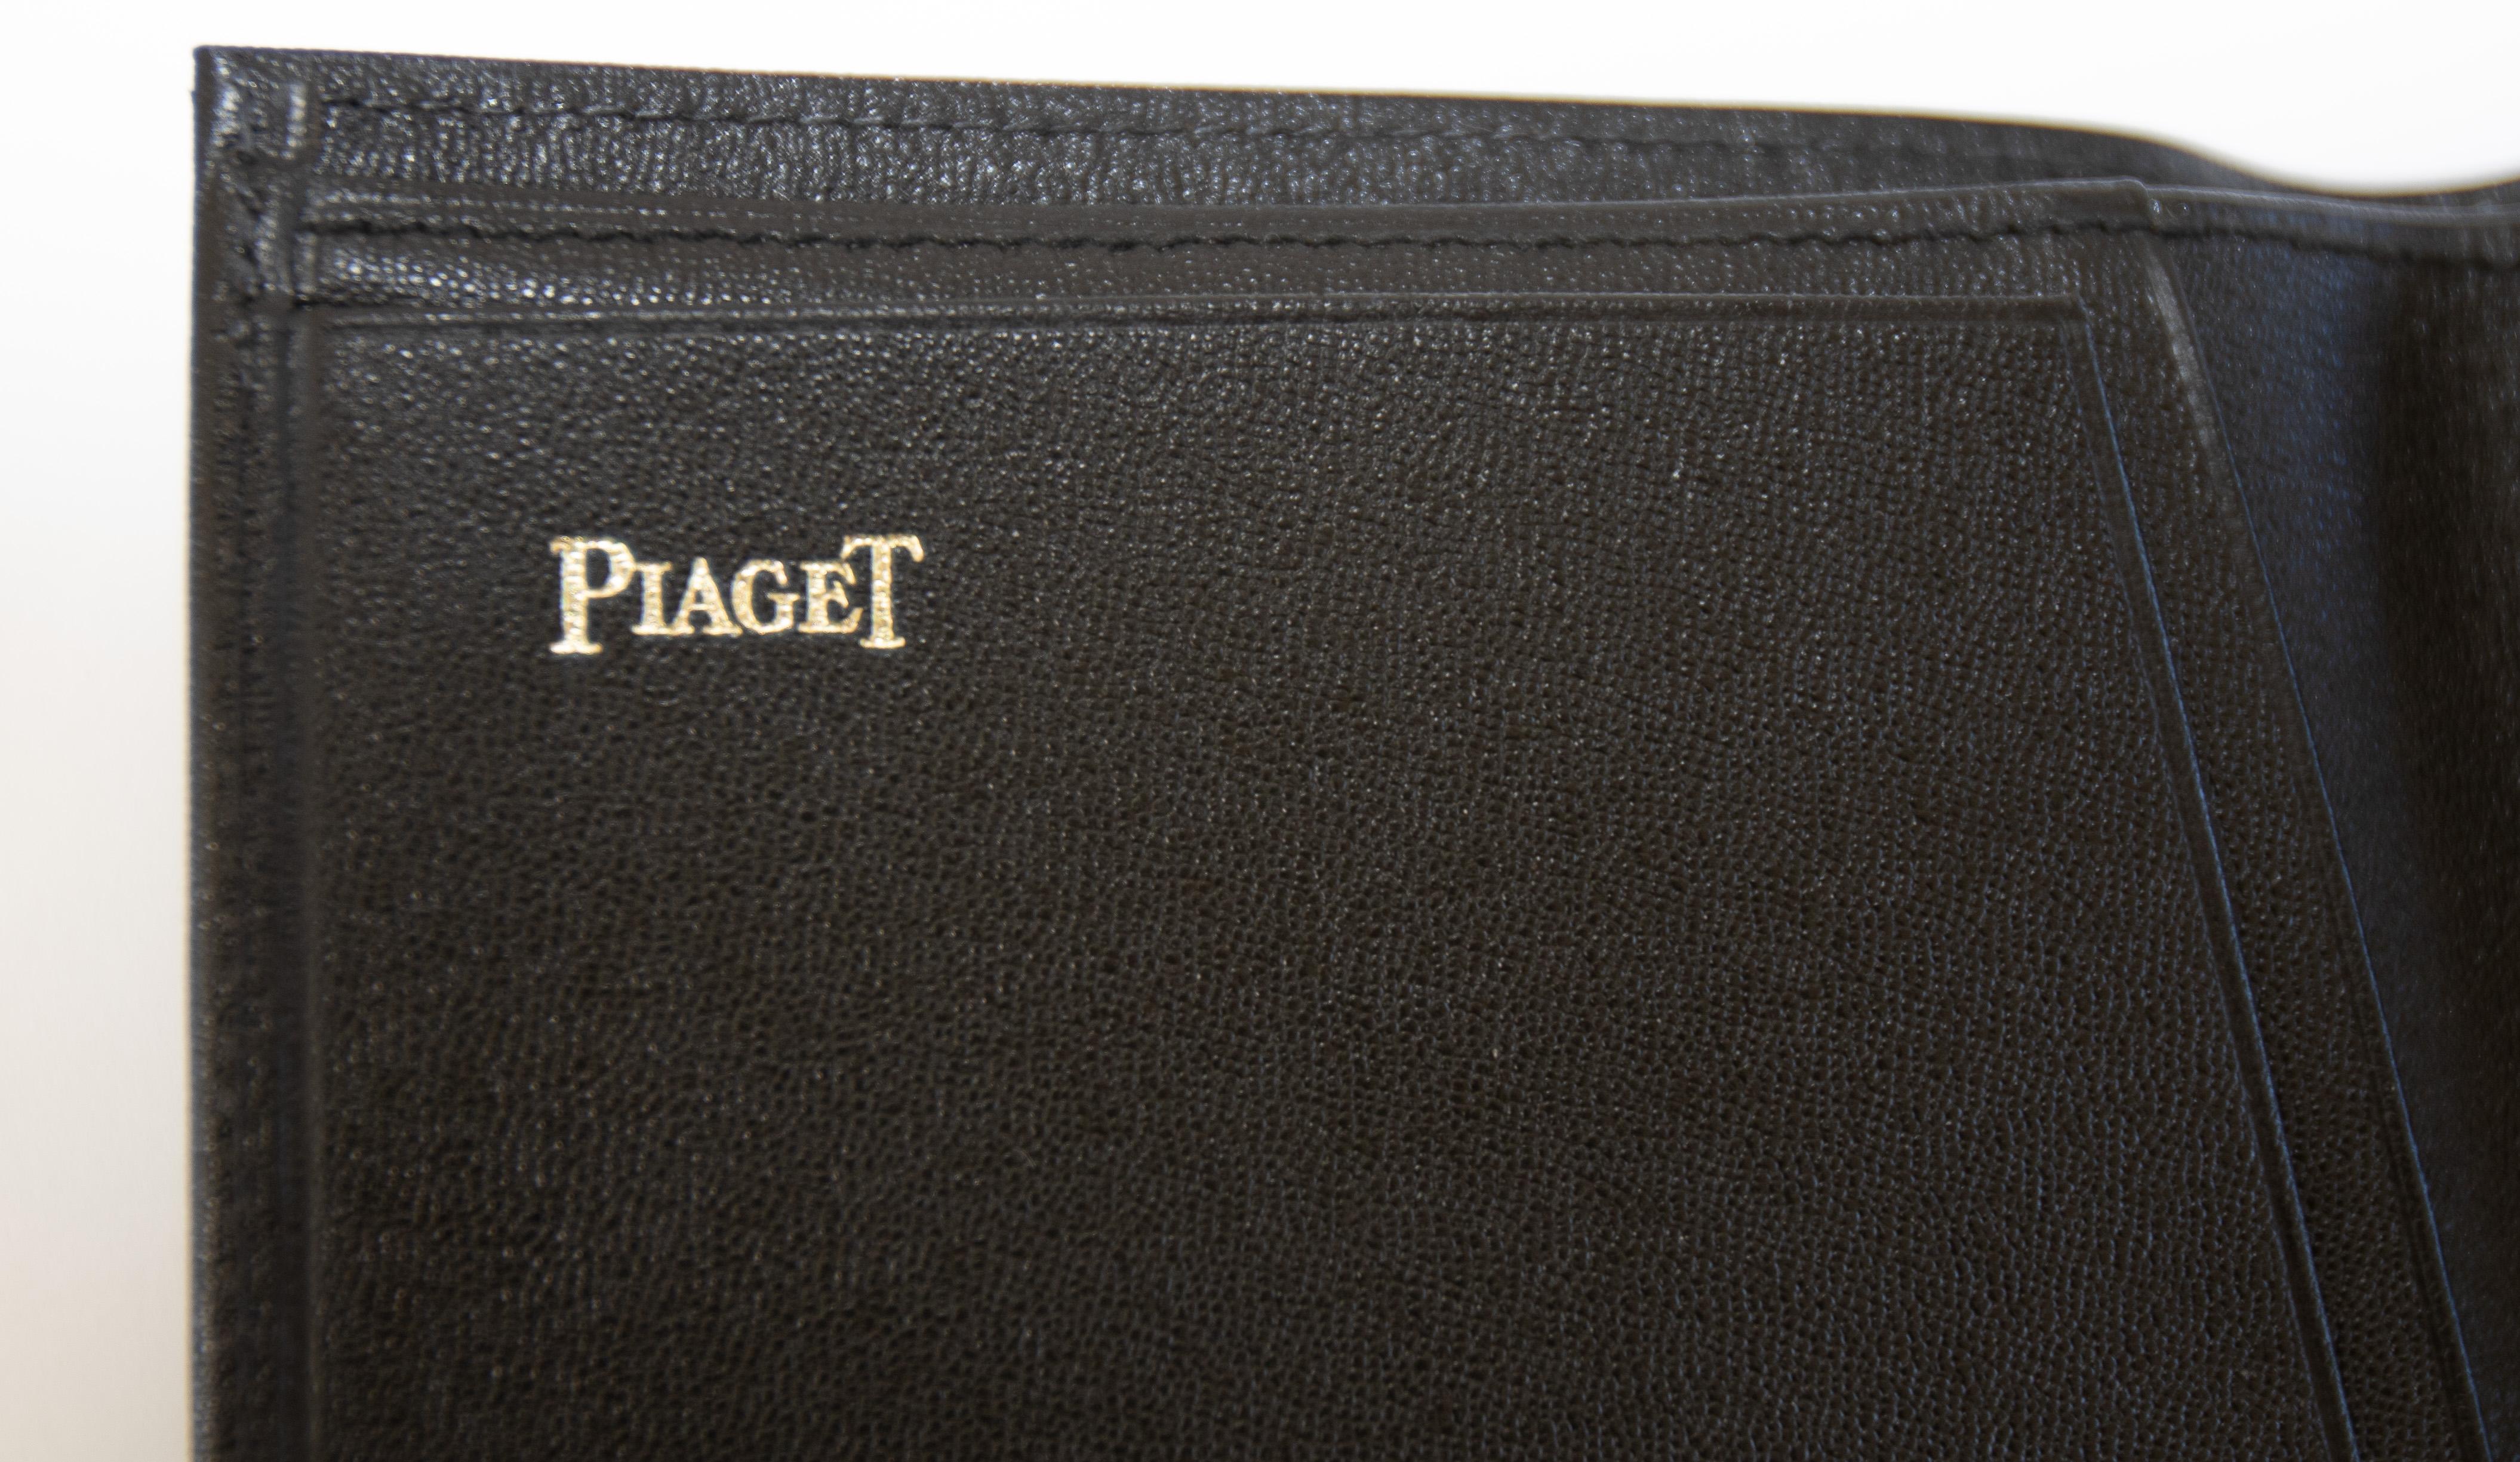 Vintage Piaget Black Leather Wallet In Good Condition For Sale In North Hollywood, CA